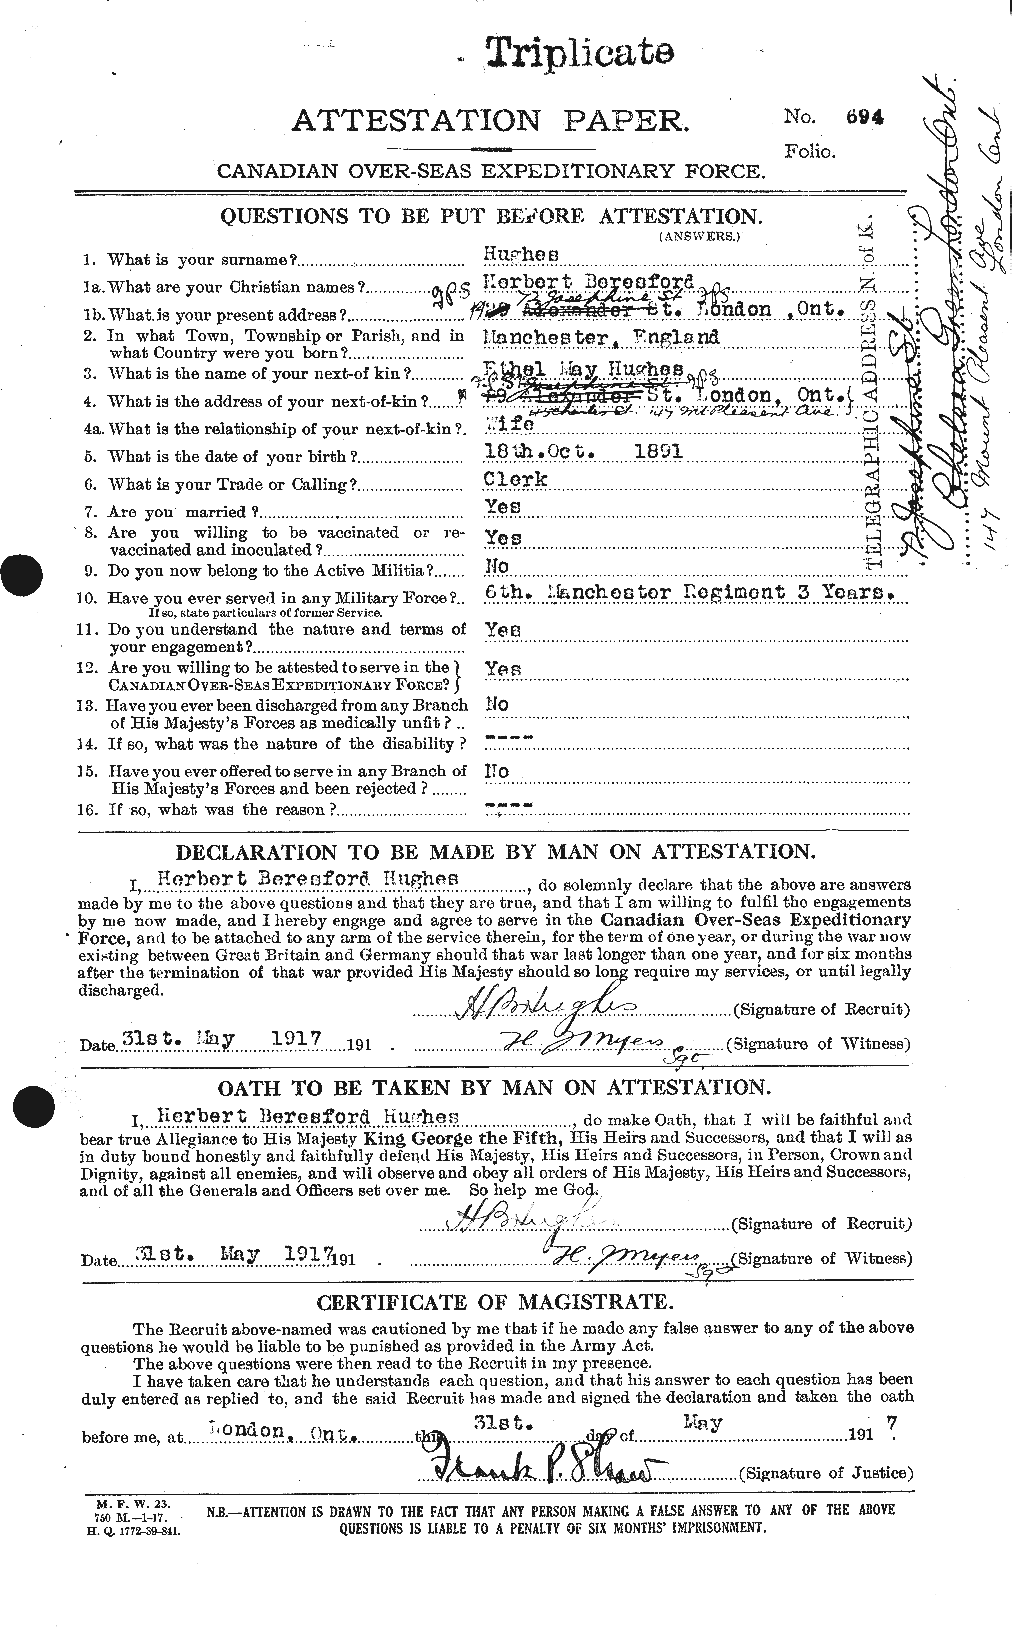 Personnel Records of the First World War - CEF 403913a